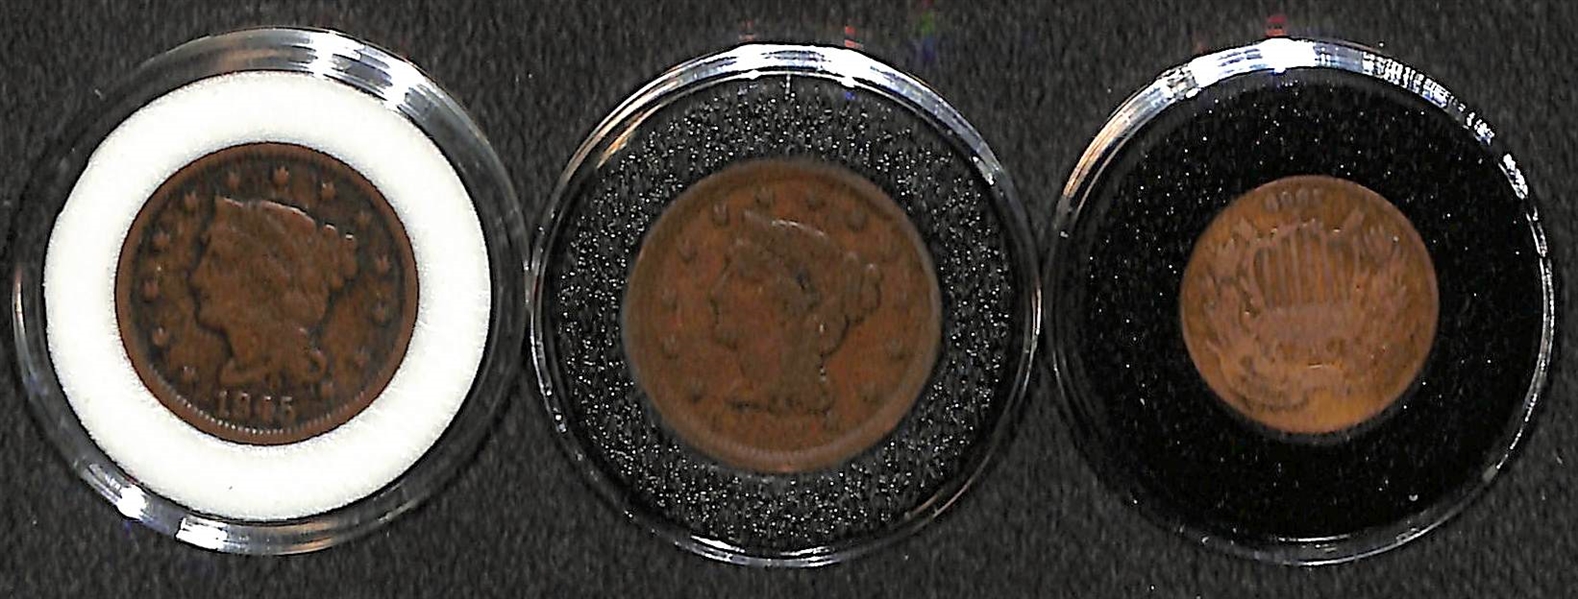 (2) Large Cent Pennies (1945 & 1952) and (1) 1869 2-Cent Coin